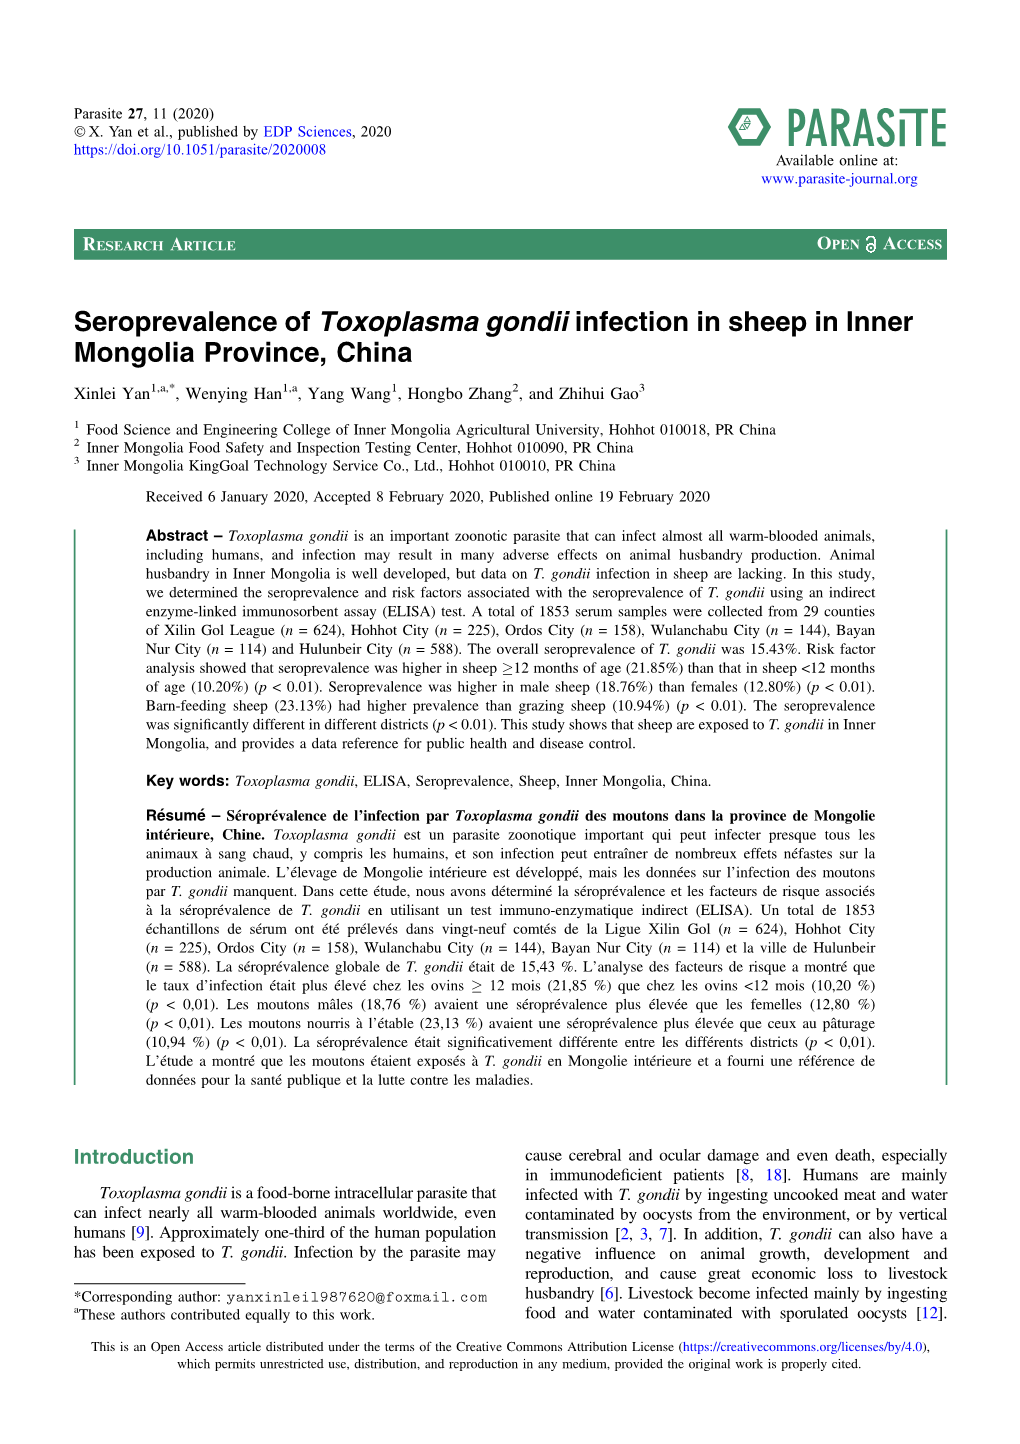 Seroprevalence of Toxoplasma Gondii Infection in Sheep in Inner Mongolia Province, China